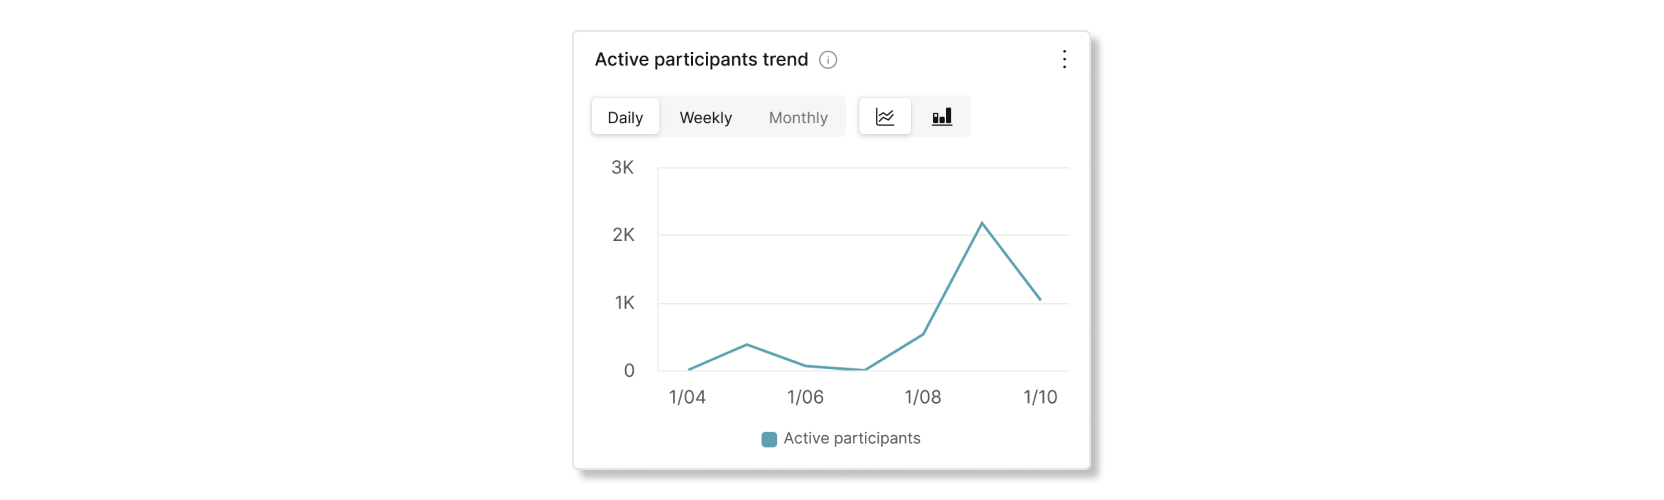 Active participants trend chart in Control Hub Slido analytics